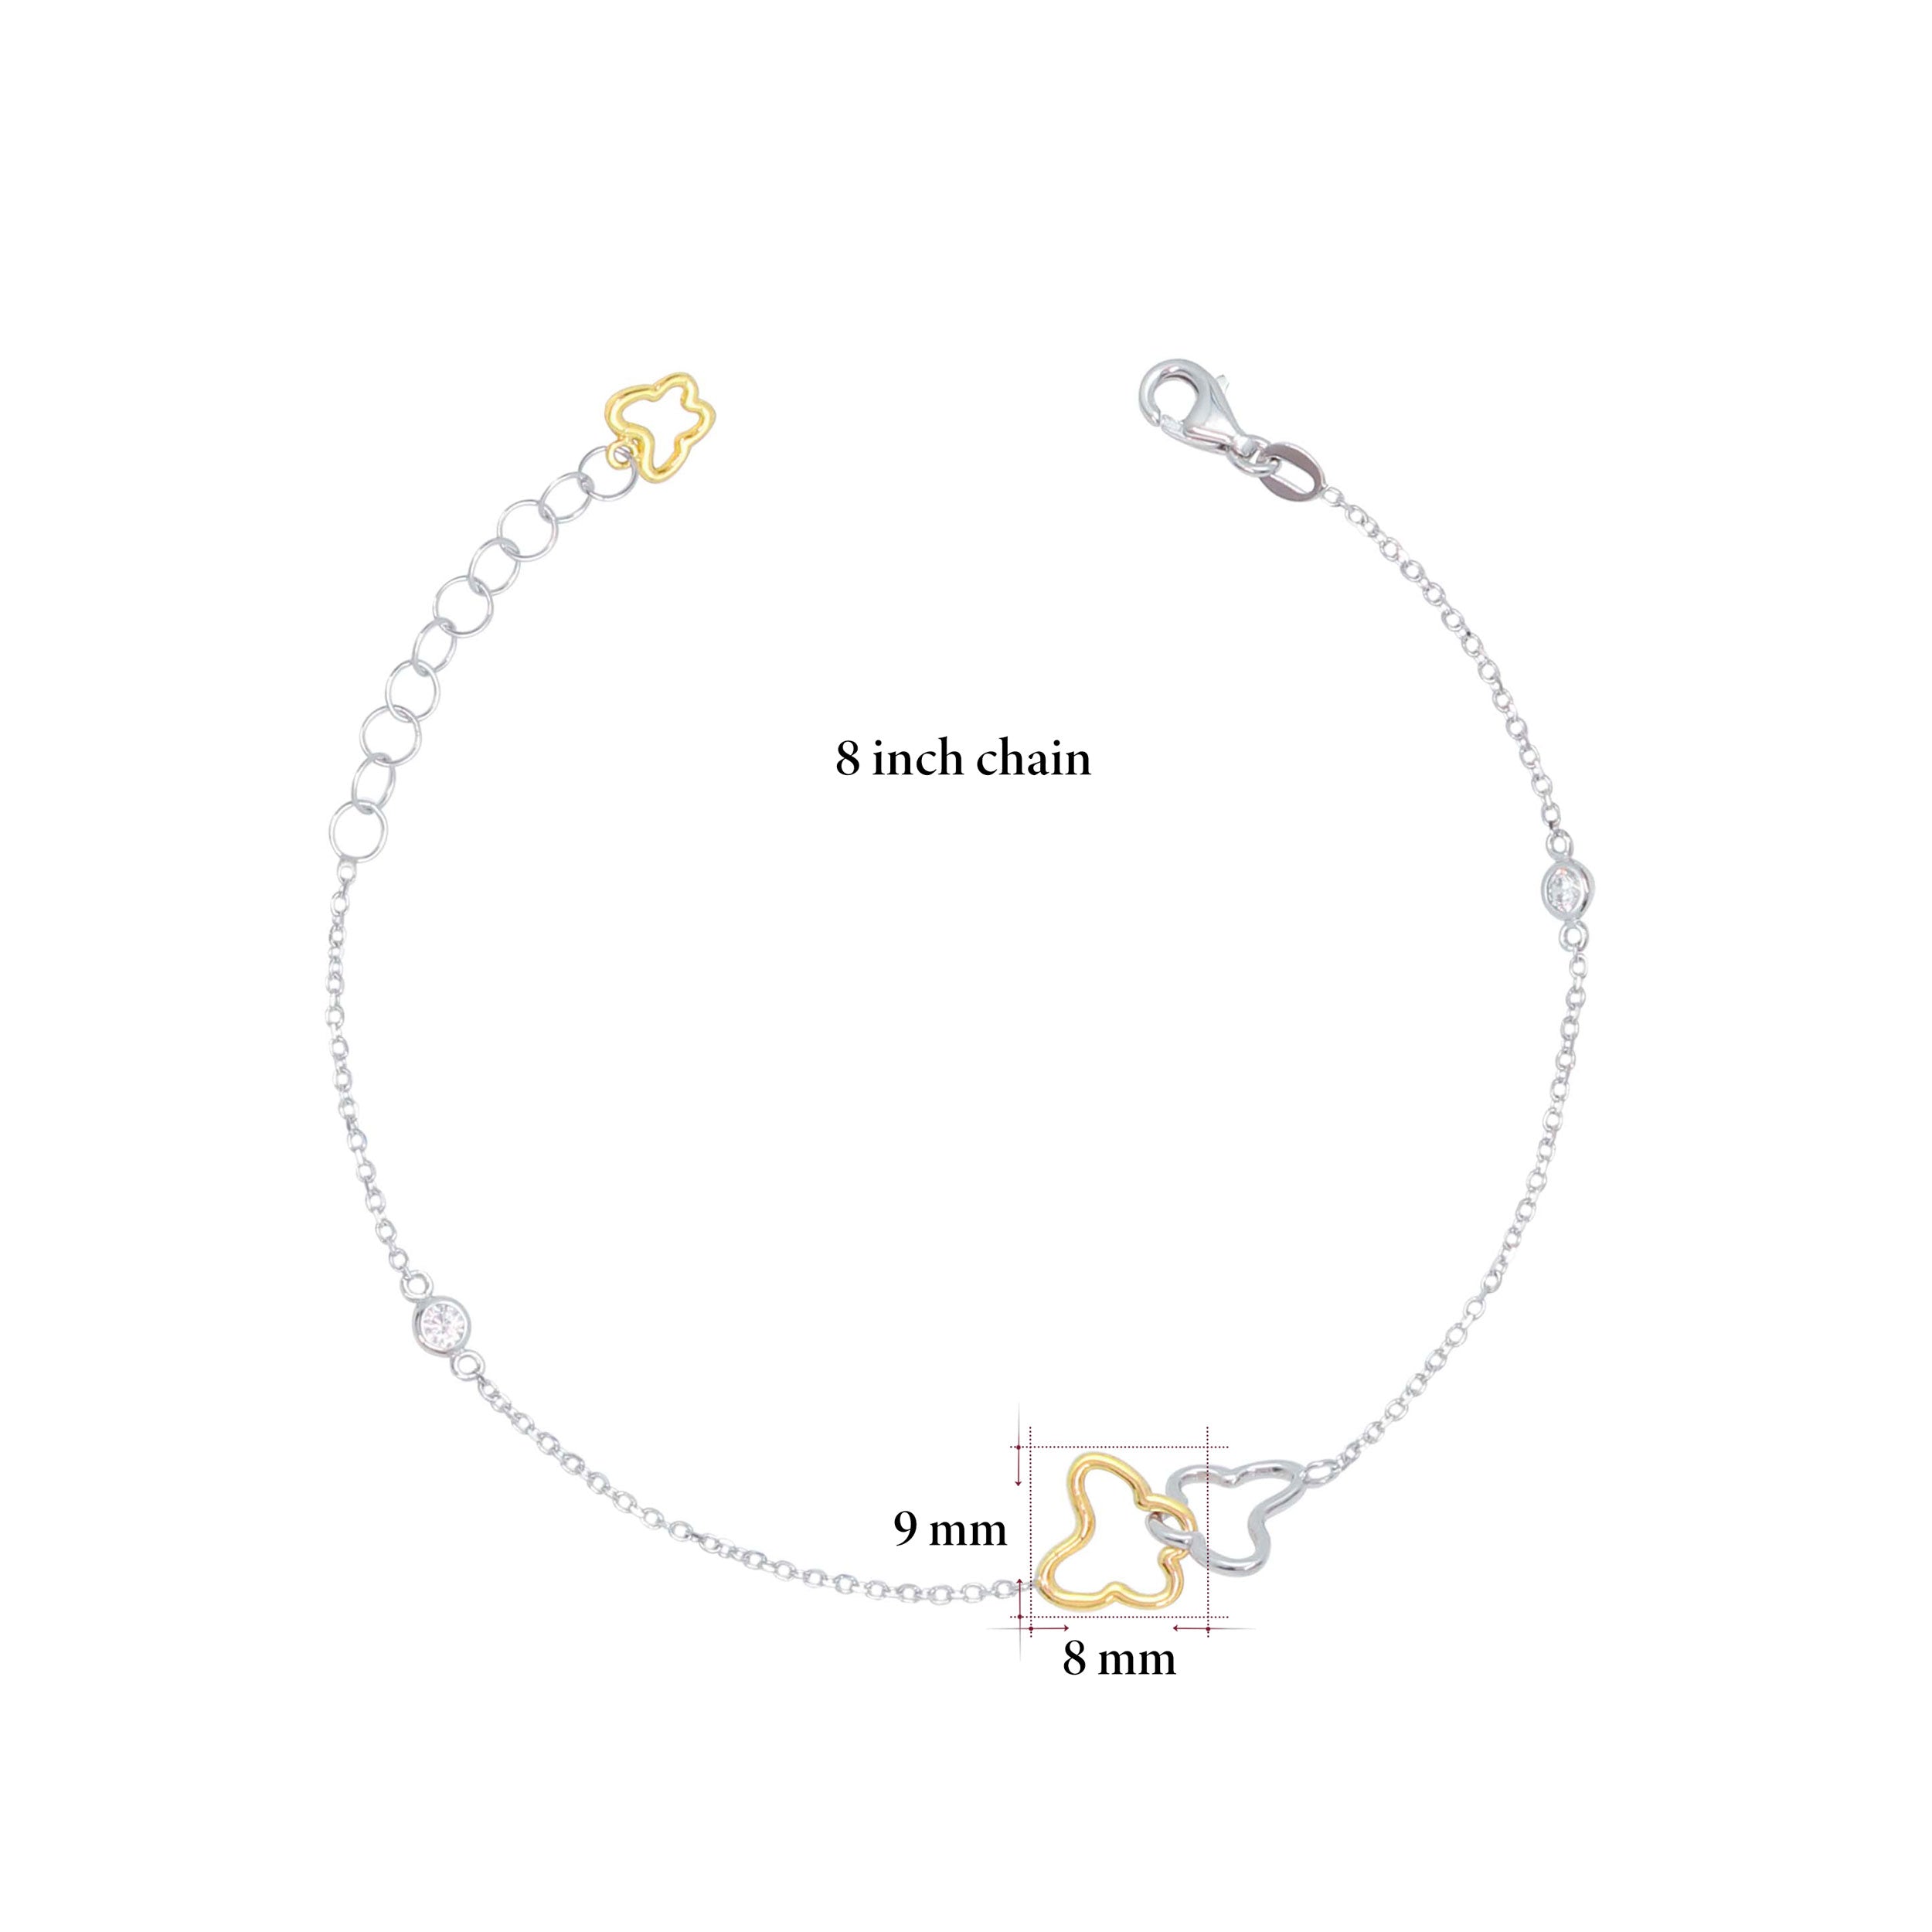 14K White and Rose or Yellow Gold Interlocking Butterfly Bracelet with Bezel Set CZ Accents